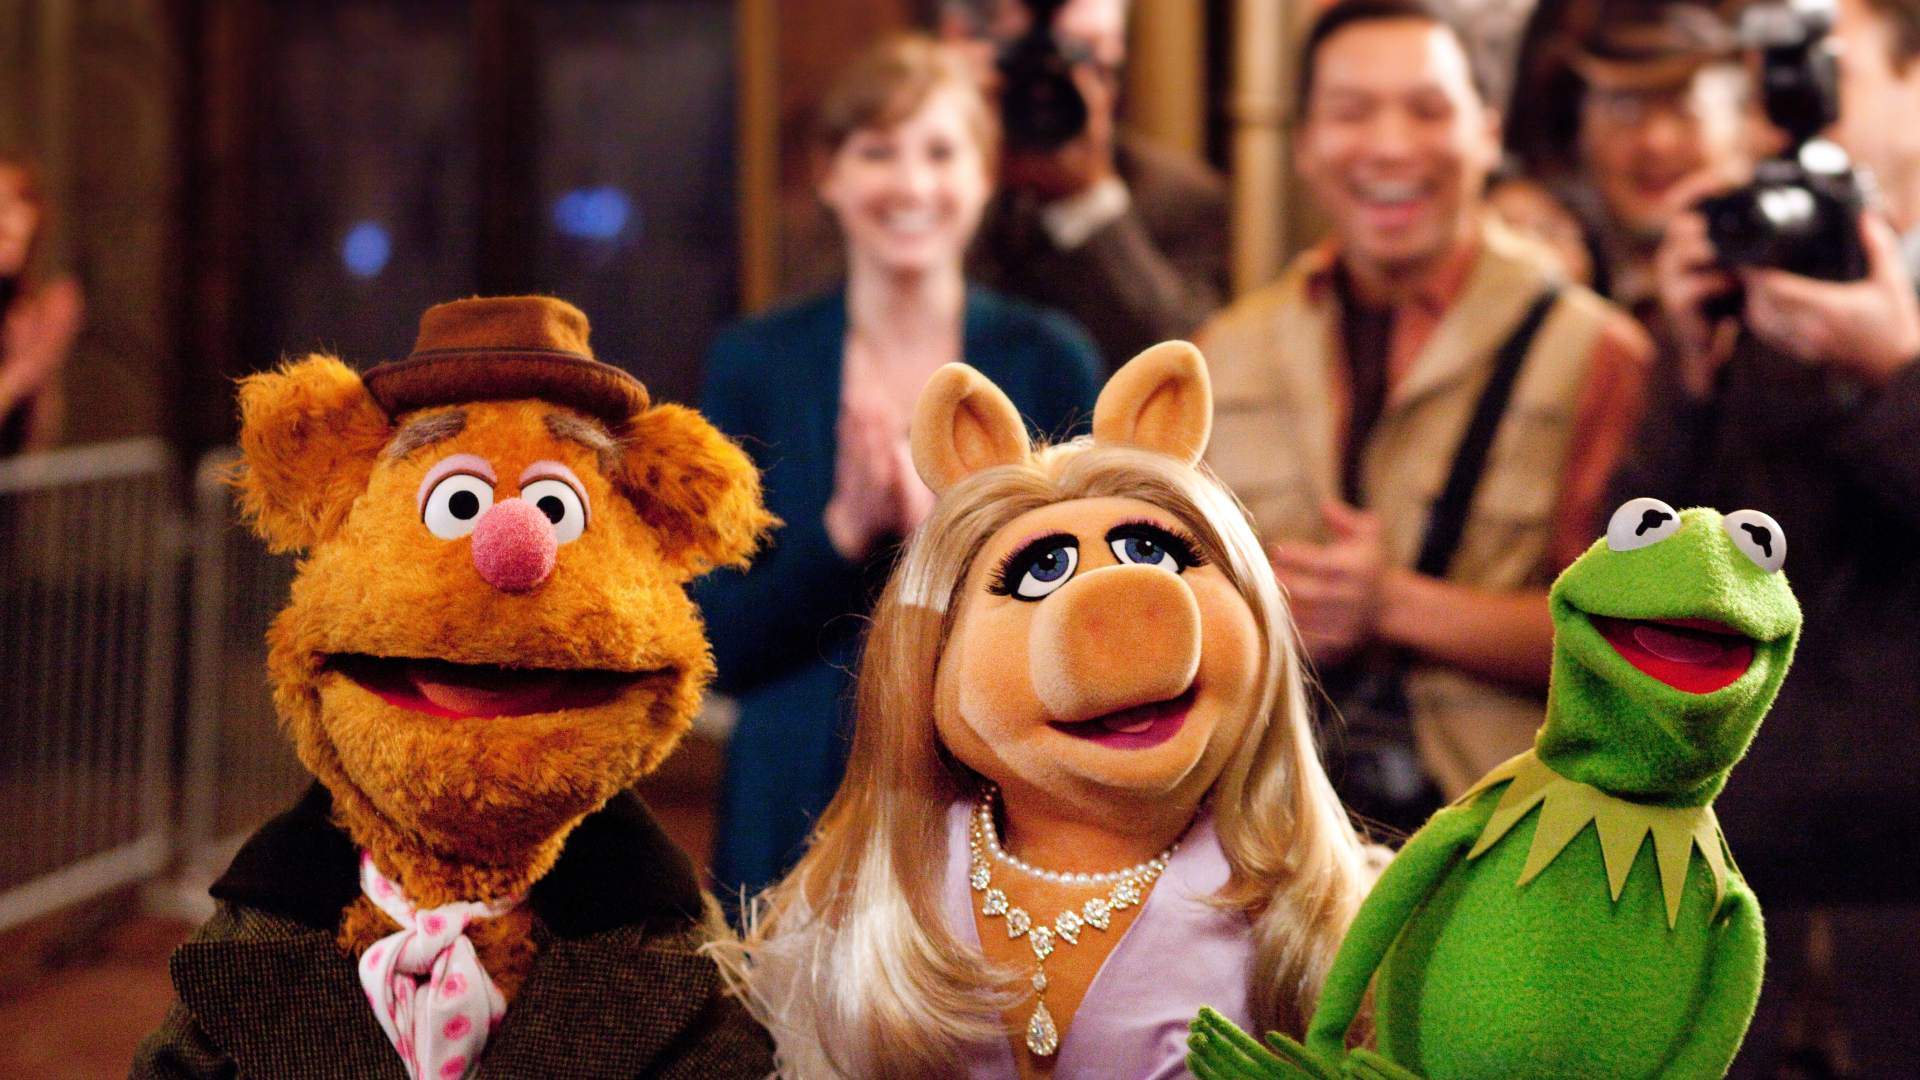 You'll Soon Be Able to Stream All Five Seasons of 'The Muppet Show' on Disney+